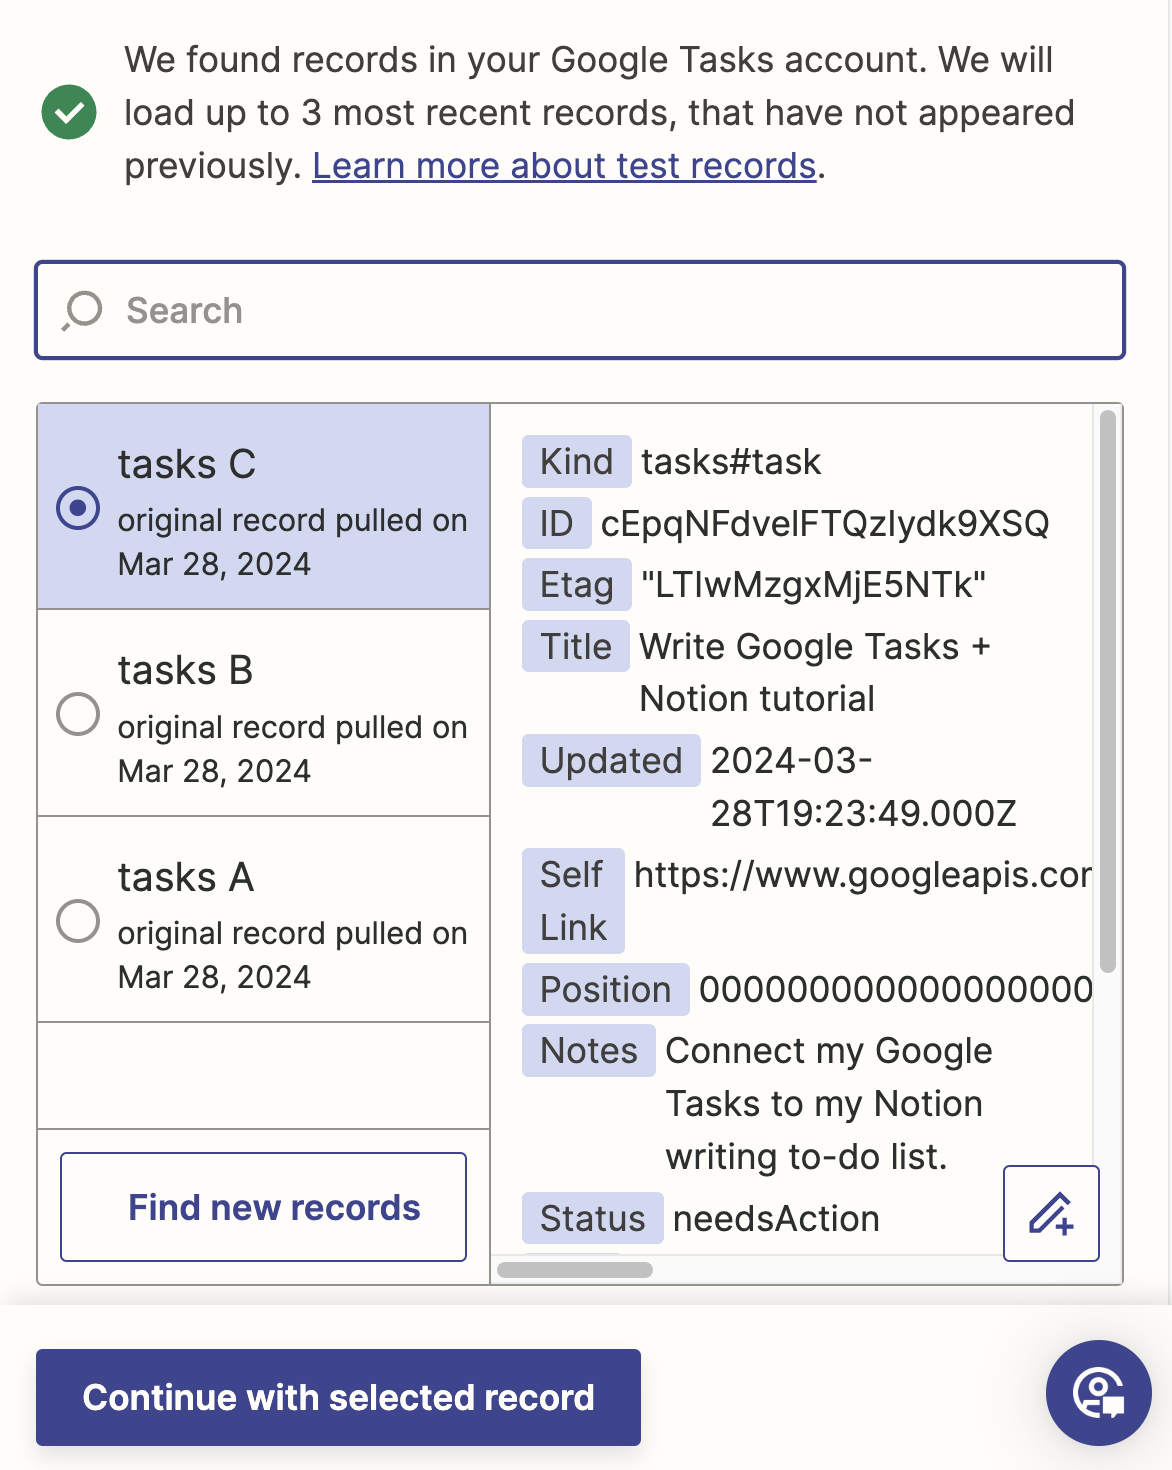 Test data from the Google Tasks step is shown, with "How does adding this to Slack work?" listed in the notes field.